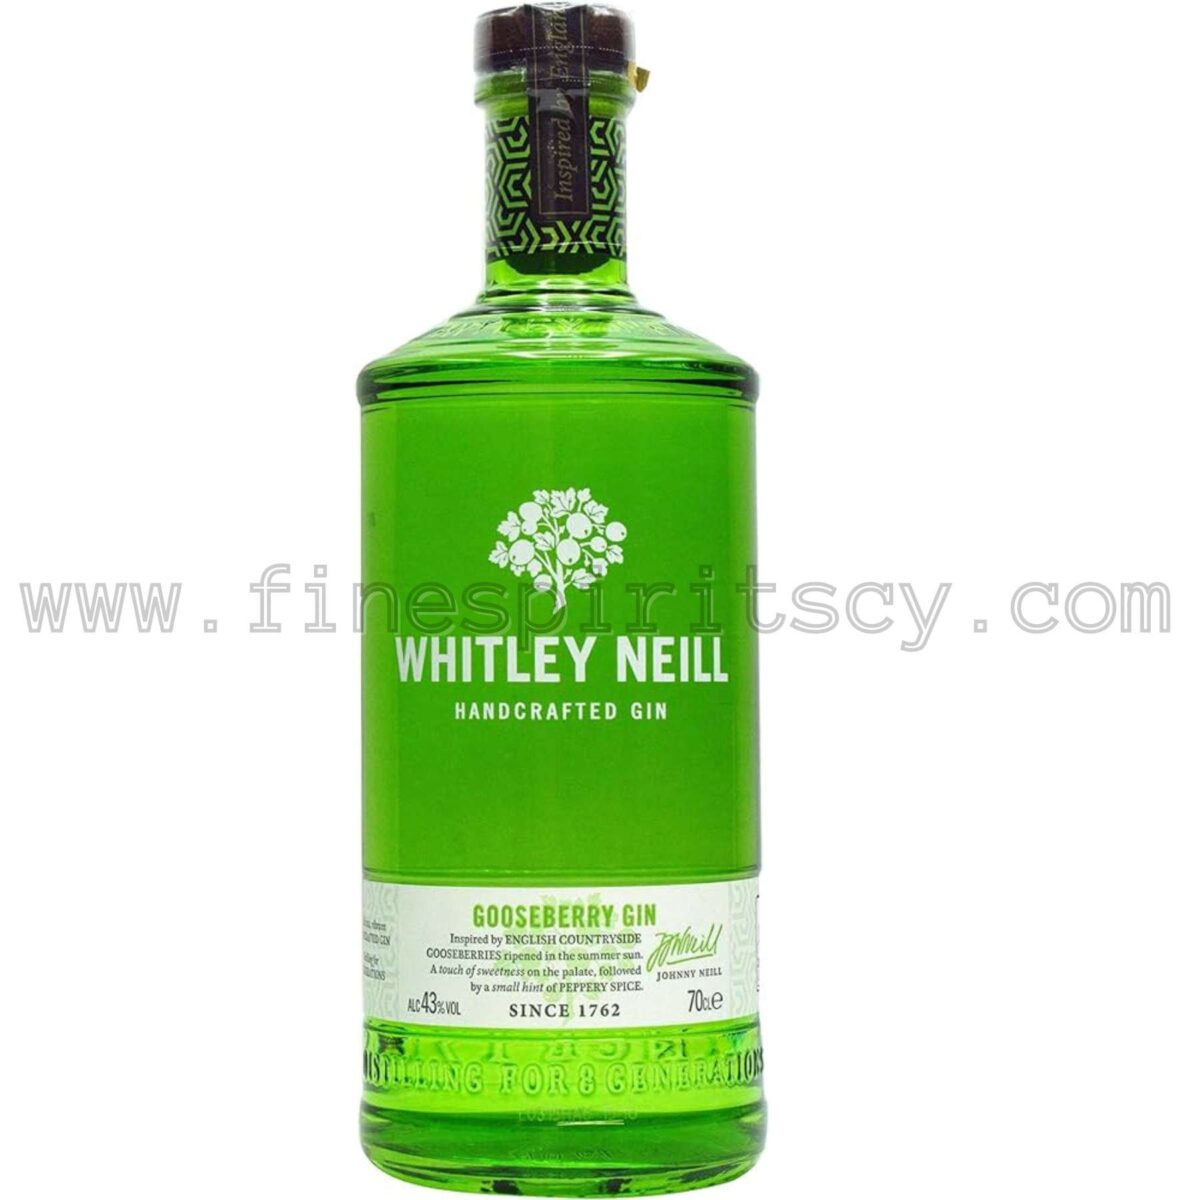 Whitley Neill Gooseberry Gin London Dry Gin Cyprus Price 700ml 70cl 0.7L